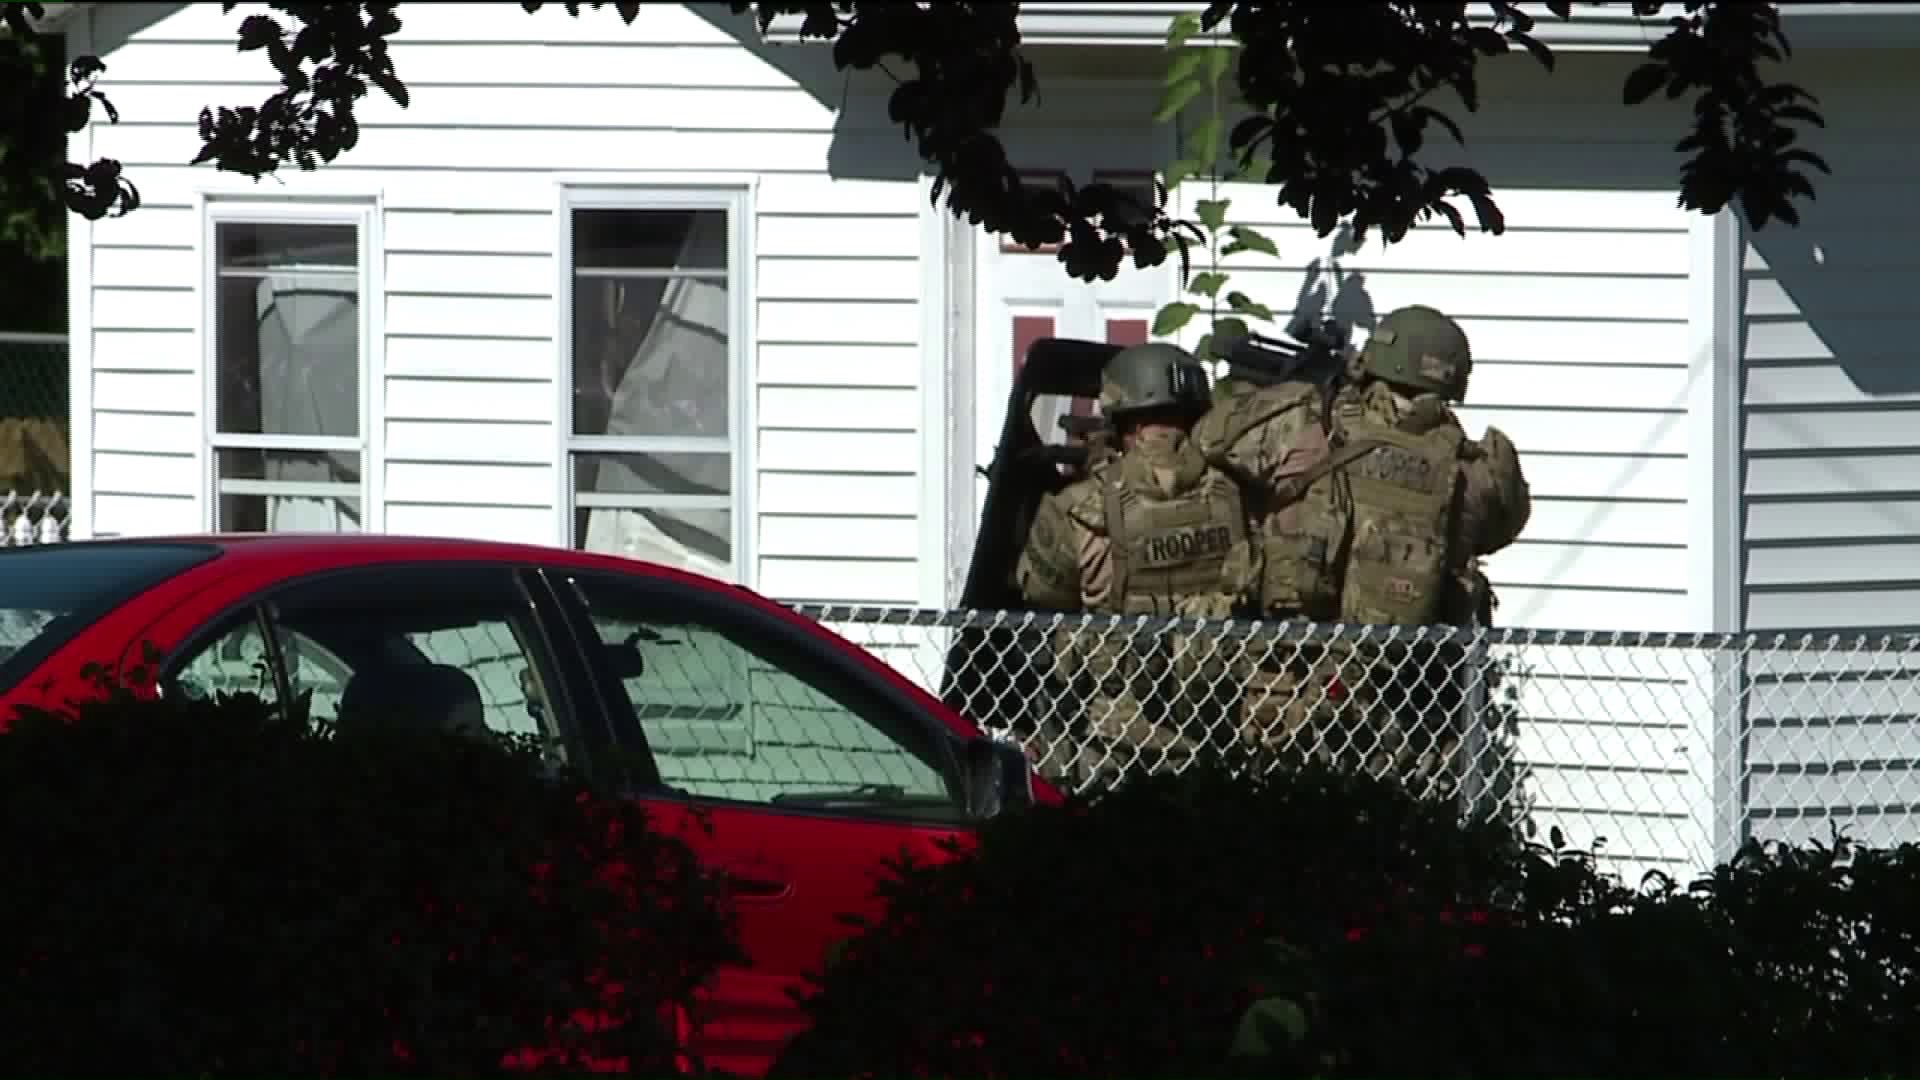 Police Respond to Standoff in Carbon County